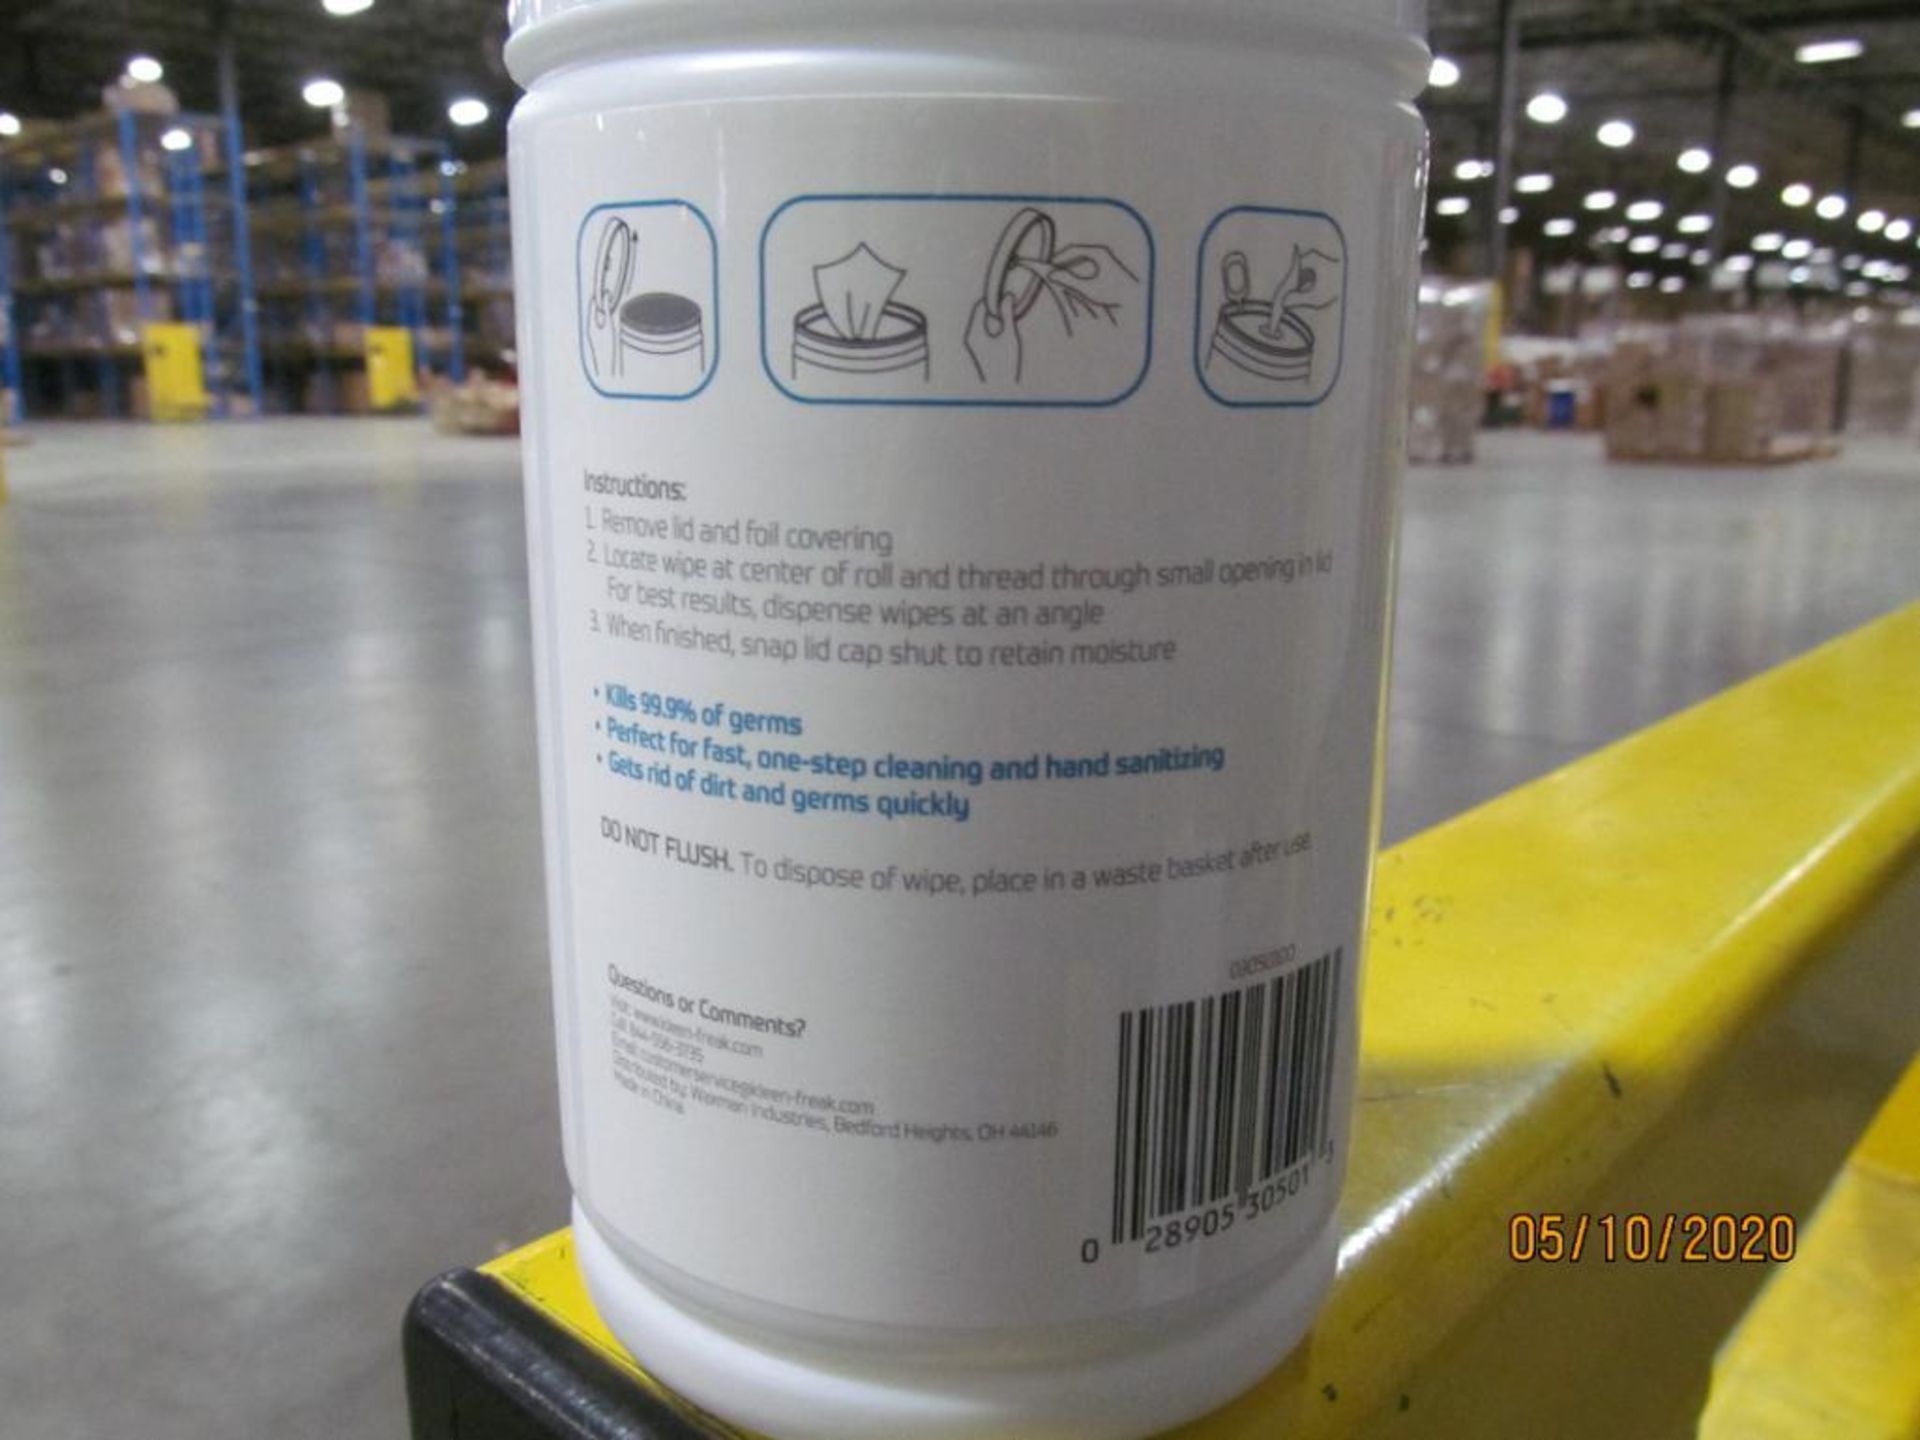 Lot of Waxman Kleen Freak Sanitizing Wipes consisting of 29,027 packages on 45 pallets. Each package - Image 2 of 11